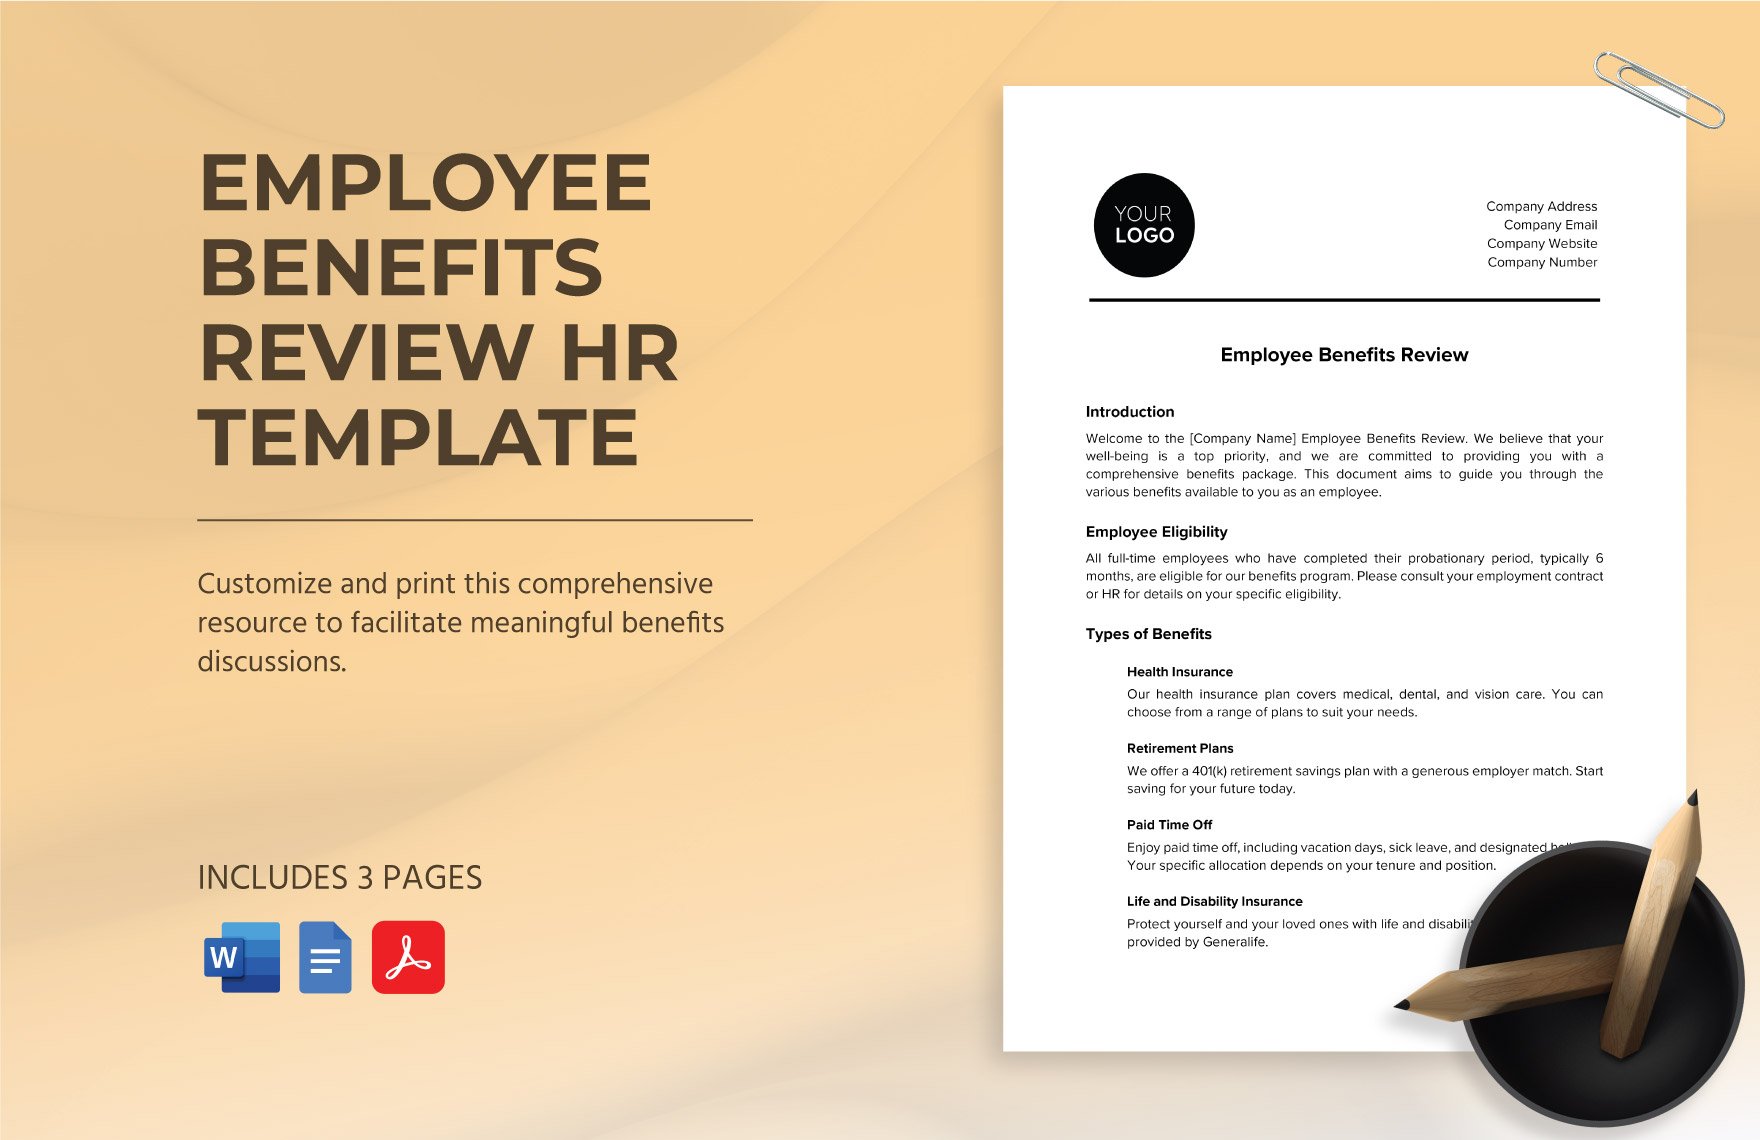 Employee Benefits Review HR Template